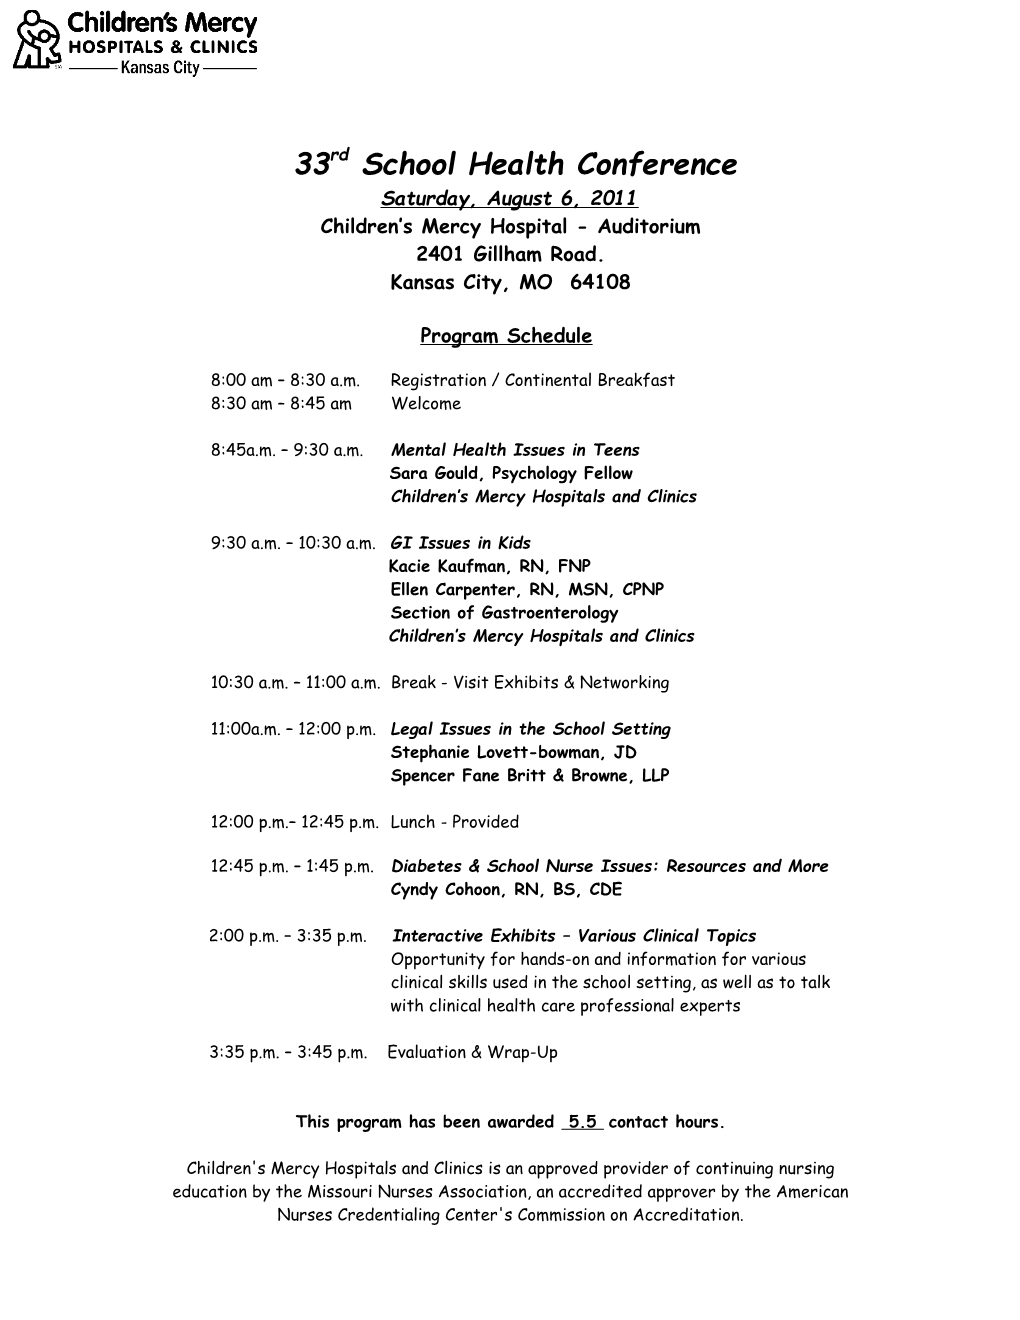 33Rdschool Health Conference